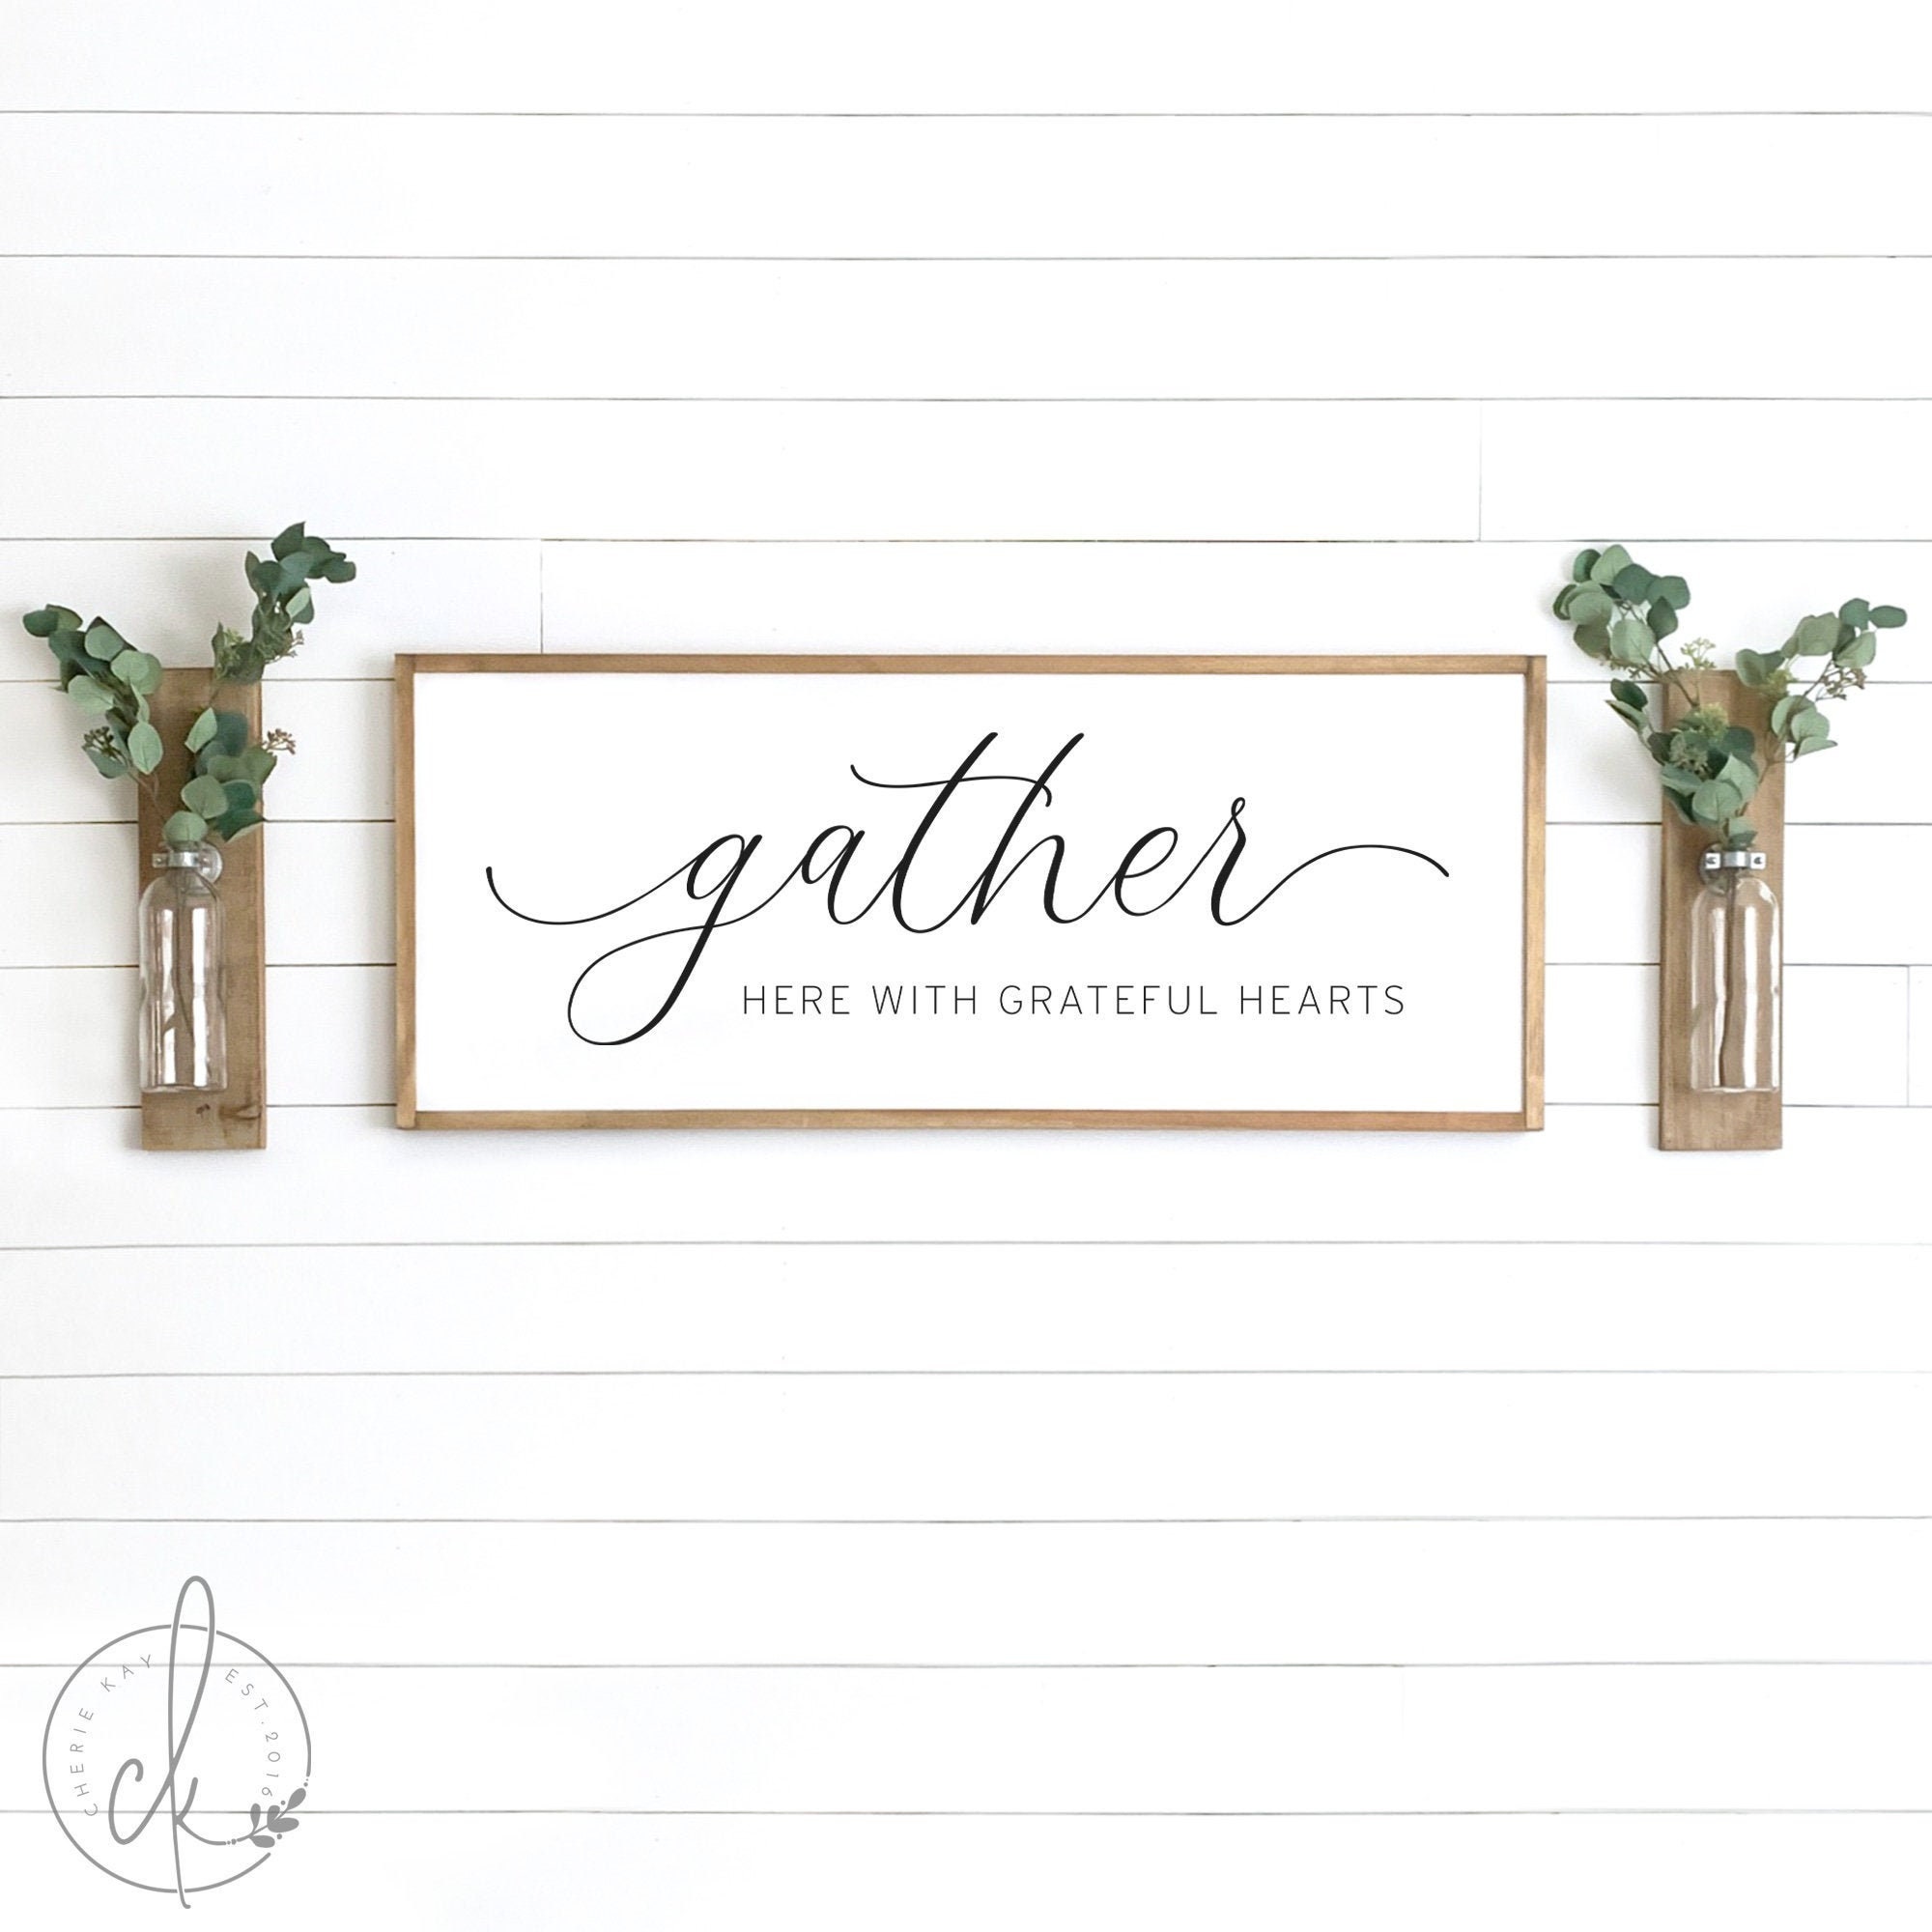 Gather here. Welsh Decor script. Give us a sign.